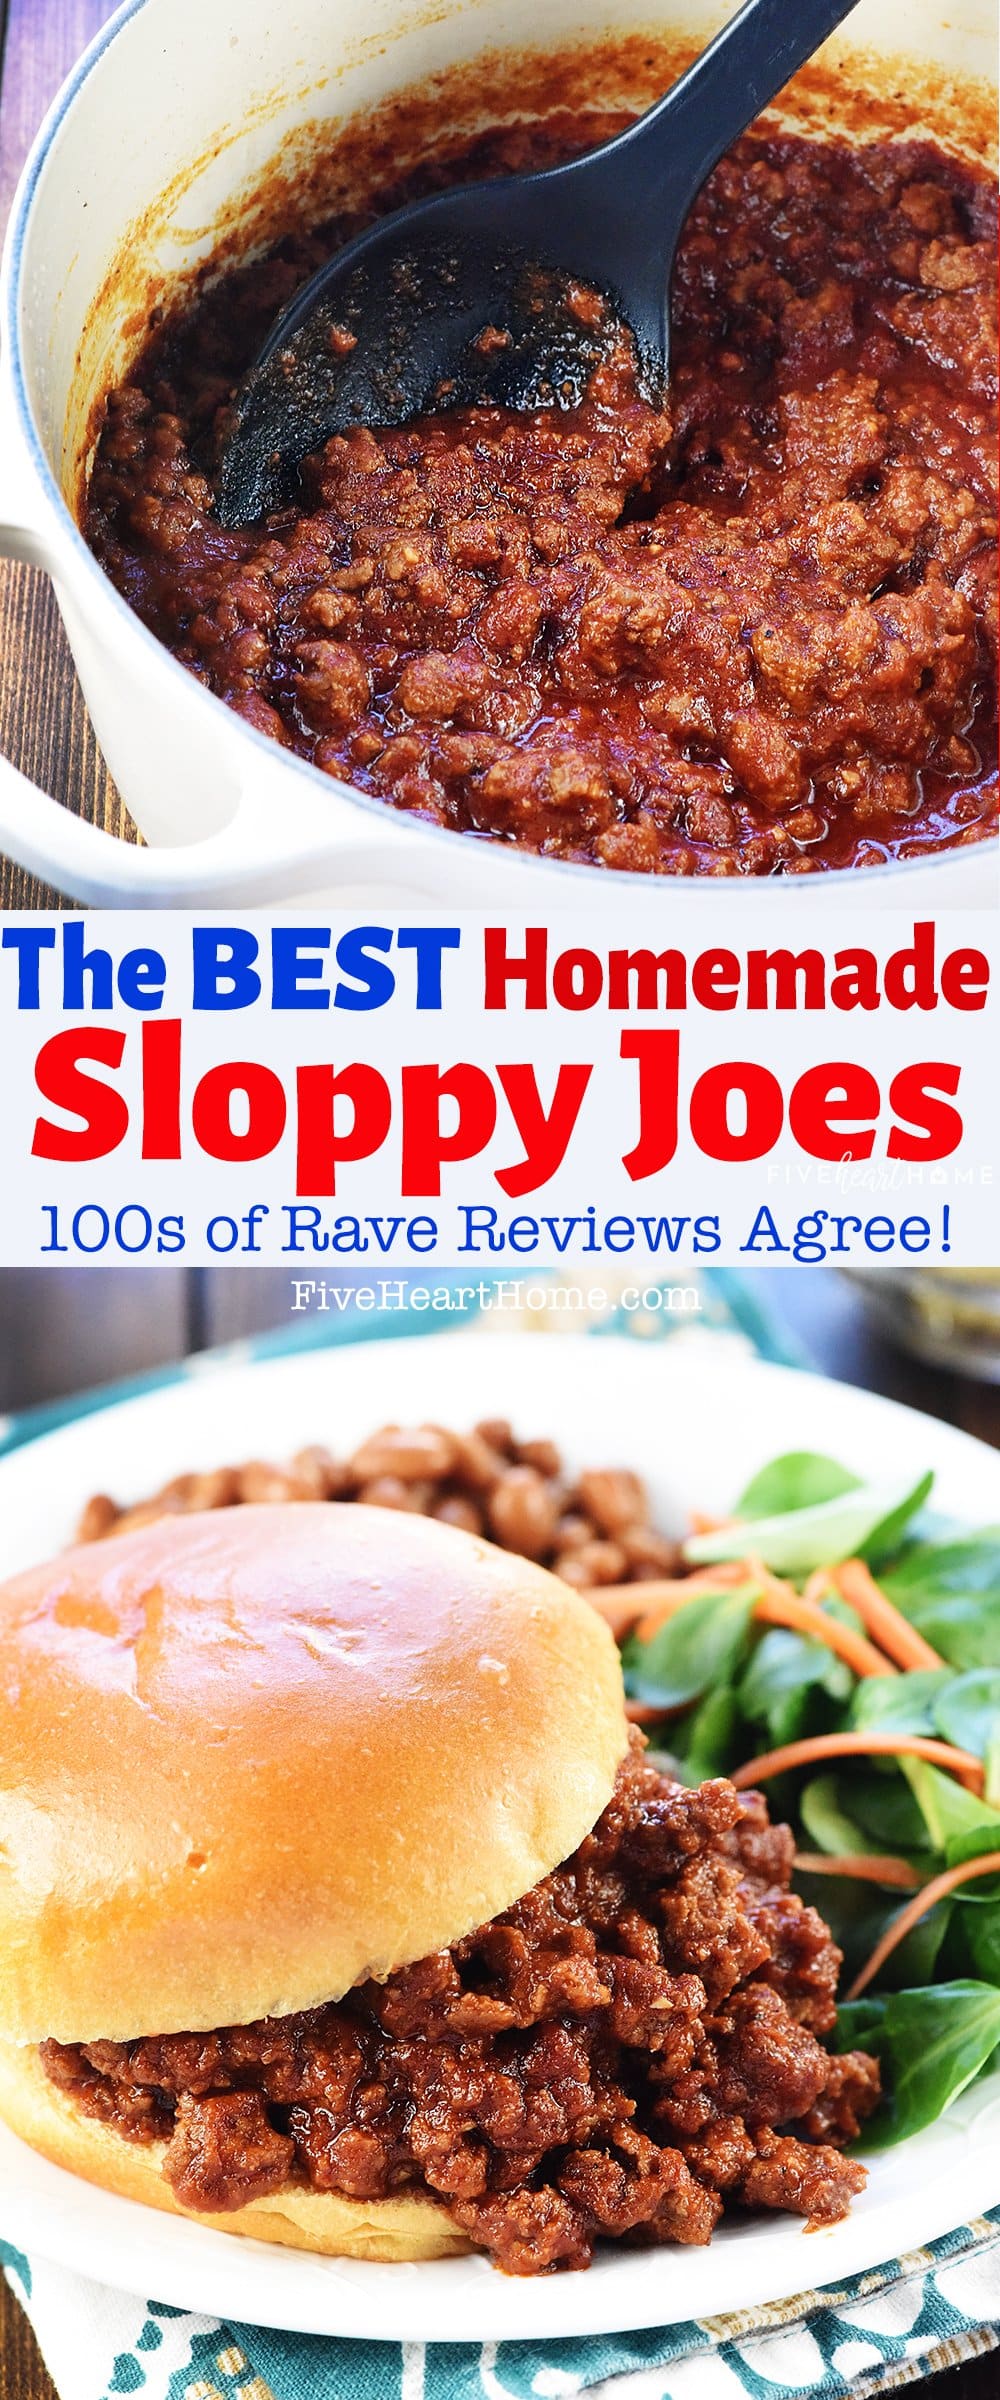 The BEST Homemade Sloppy Joe Recipe ~ these amazing Sloppy Joes are not only delicious, but they're quick and easy to make using real ingredients instead of a store-bought can of sauce. Hundreds of rave reviews agree! | FiveHeartHome.com via @fivehearthome